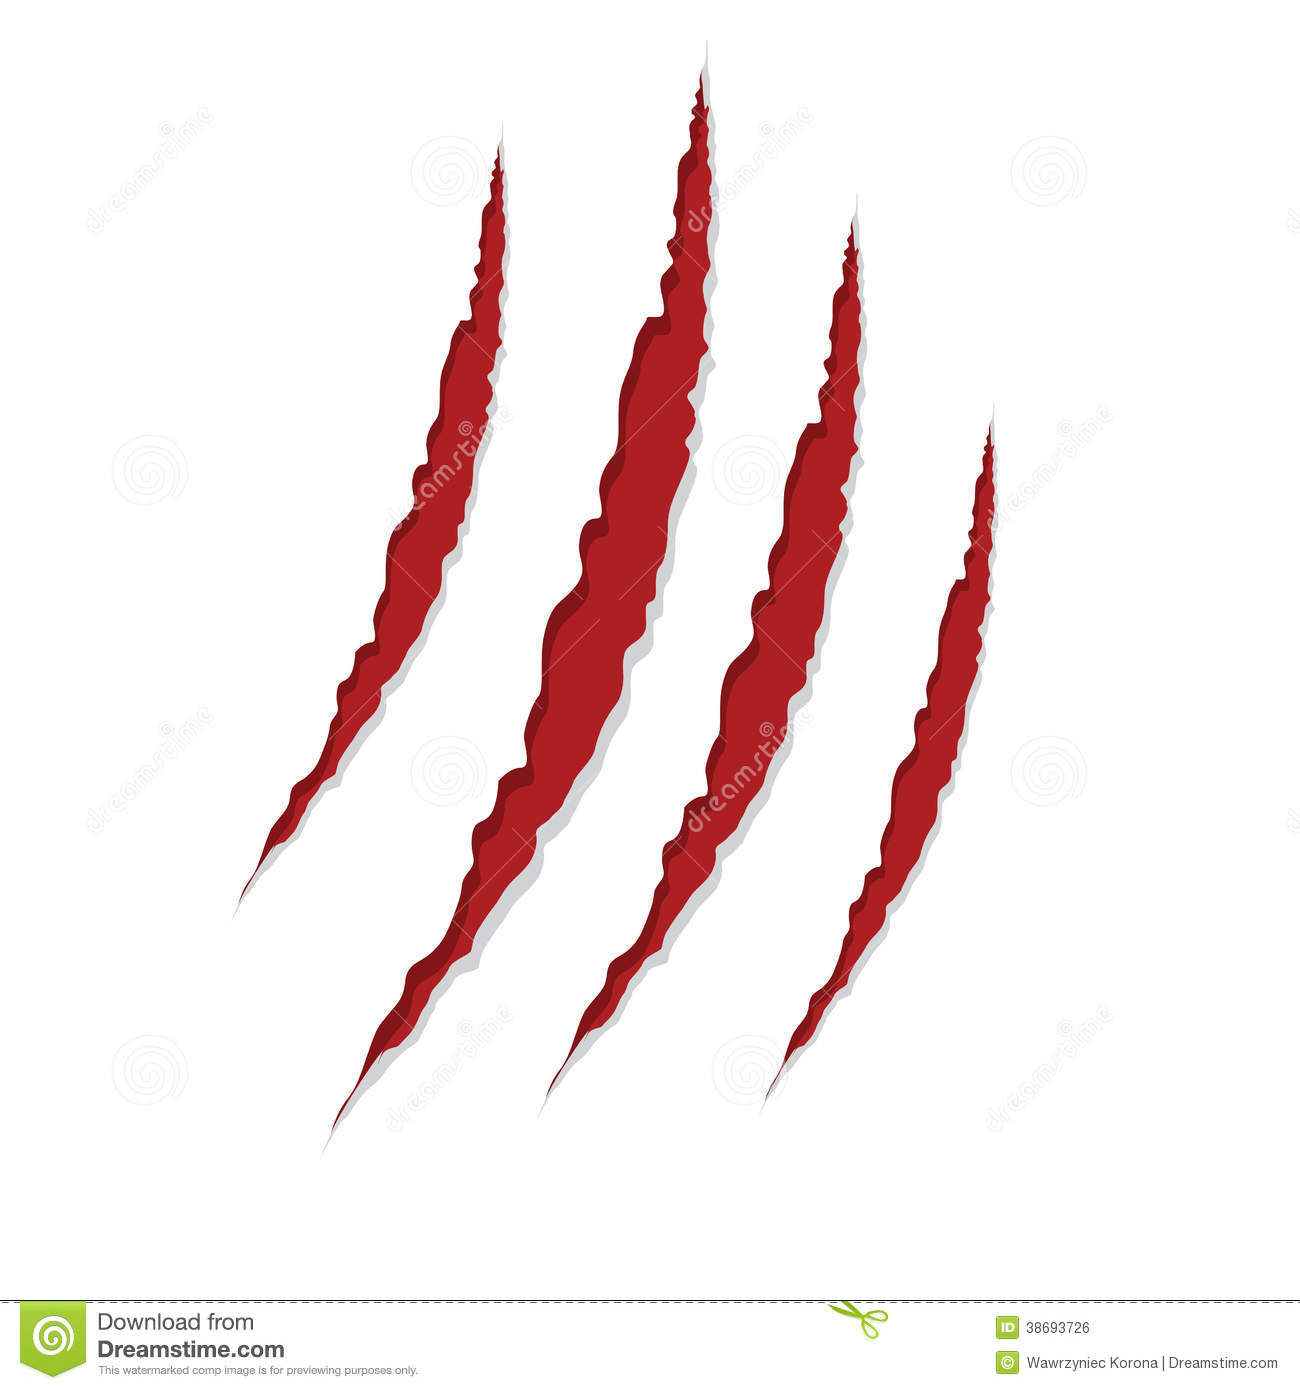 Claw Scratches Isolated On White Royalty Free Stock Image   Image